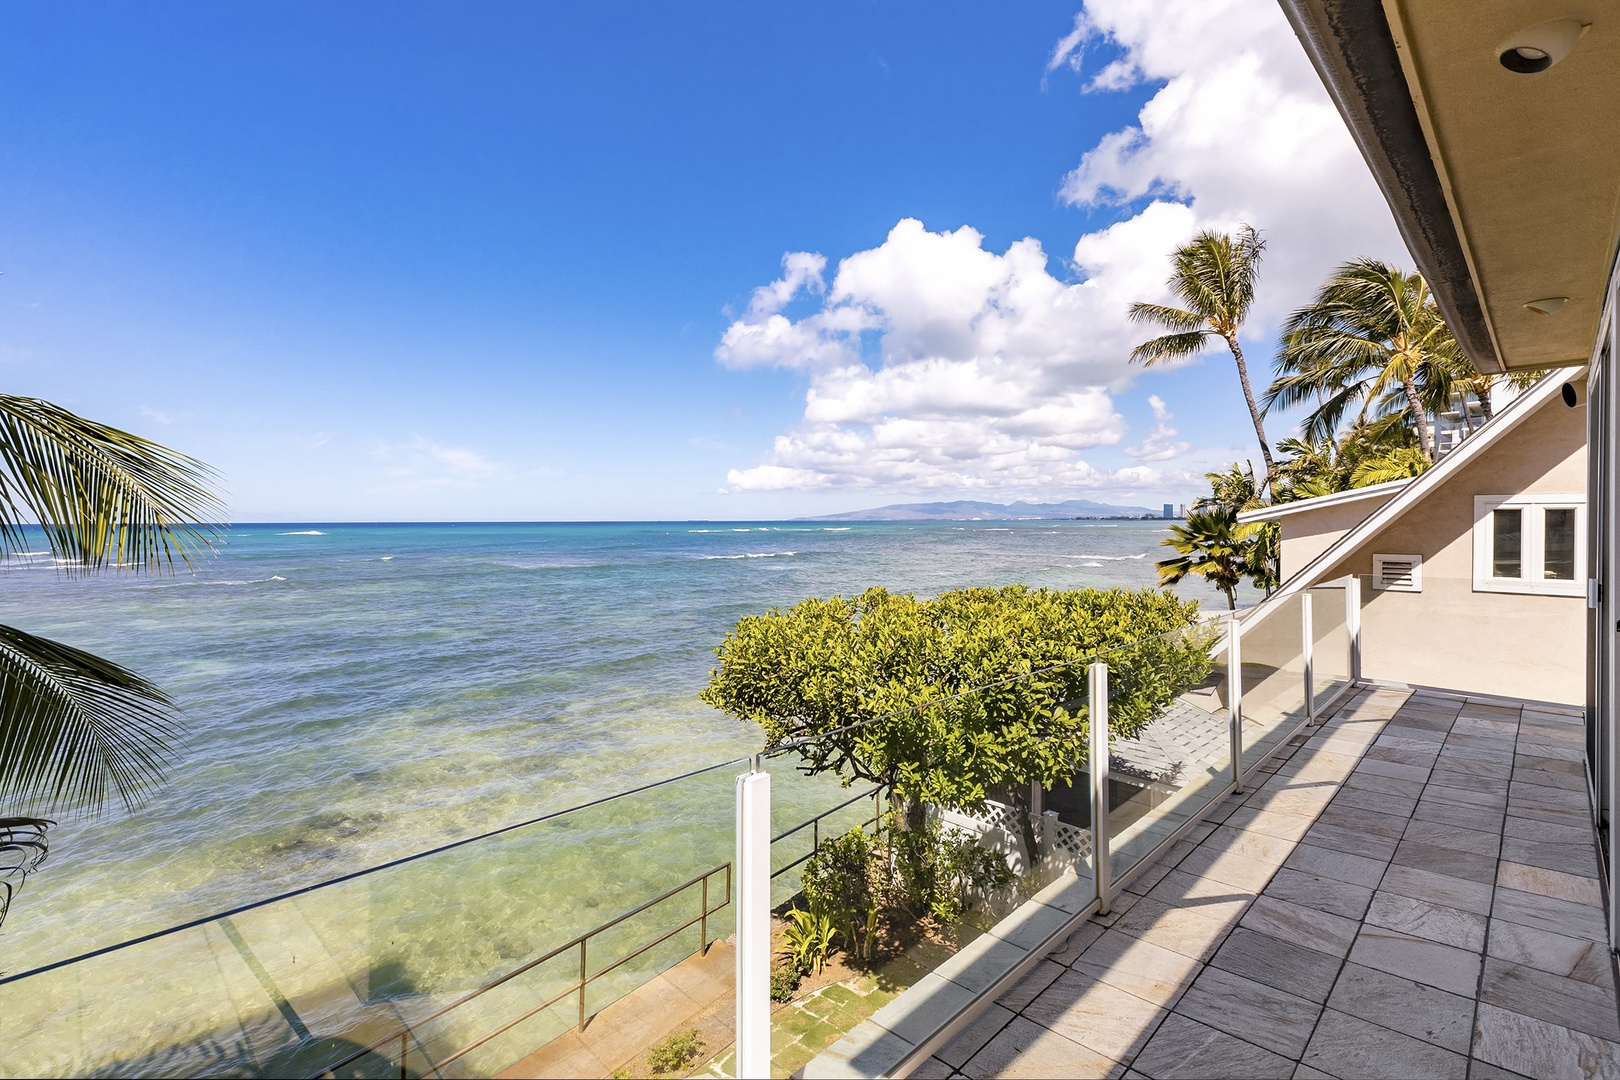 Honolulu Vacation Rentals, Diamond Head Surf House - Primary Suite covered lanai with ocean views.